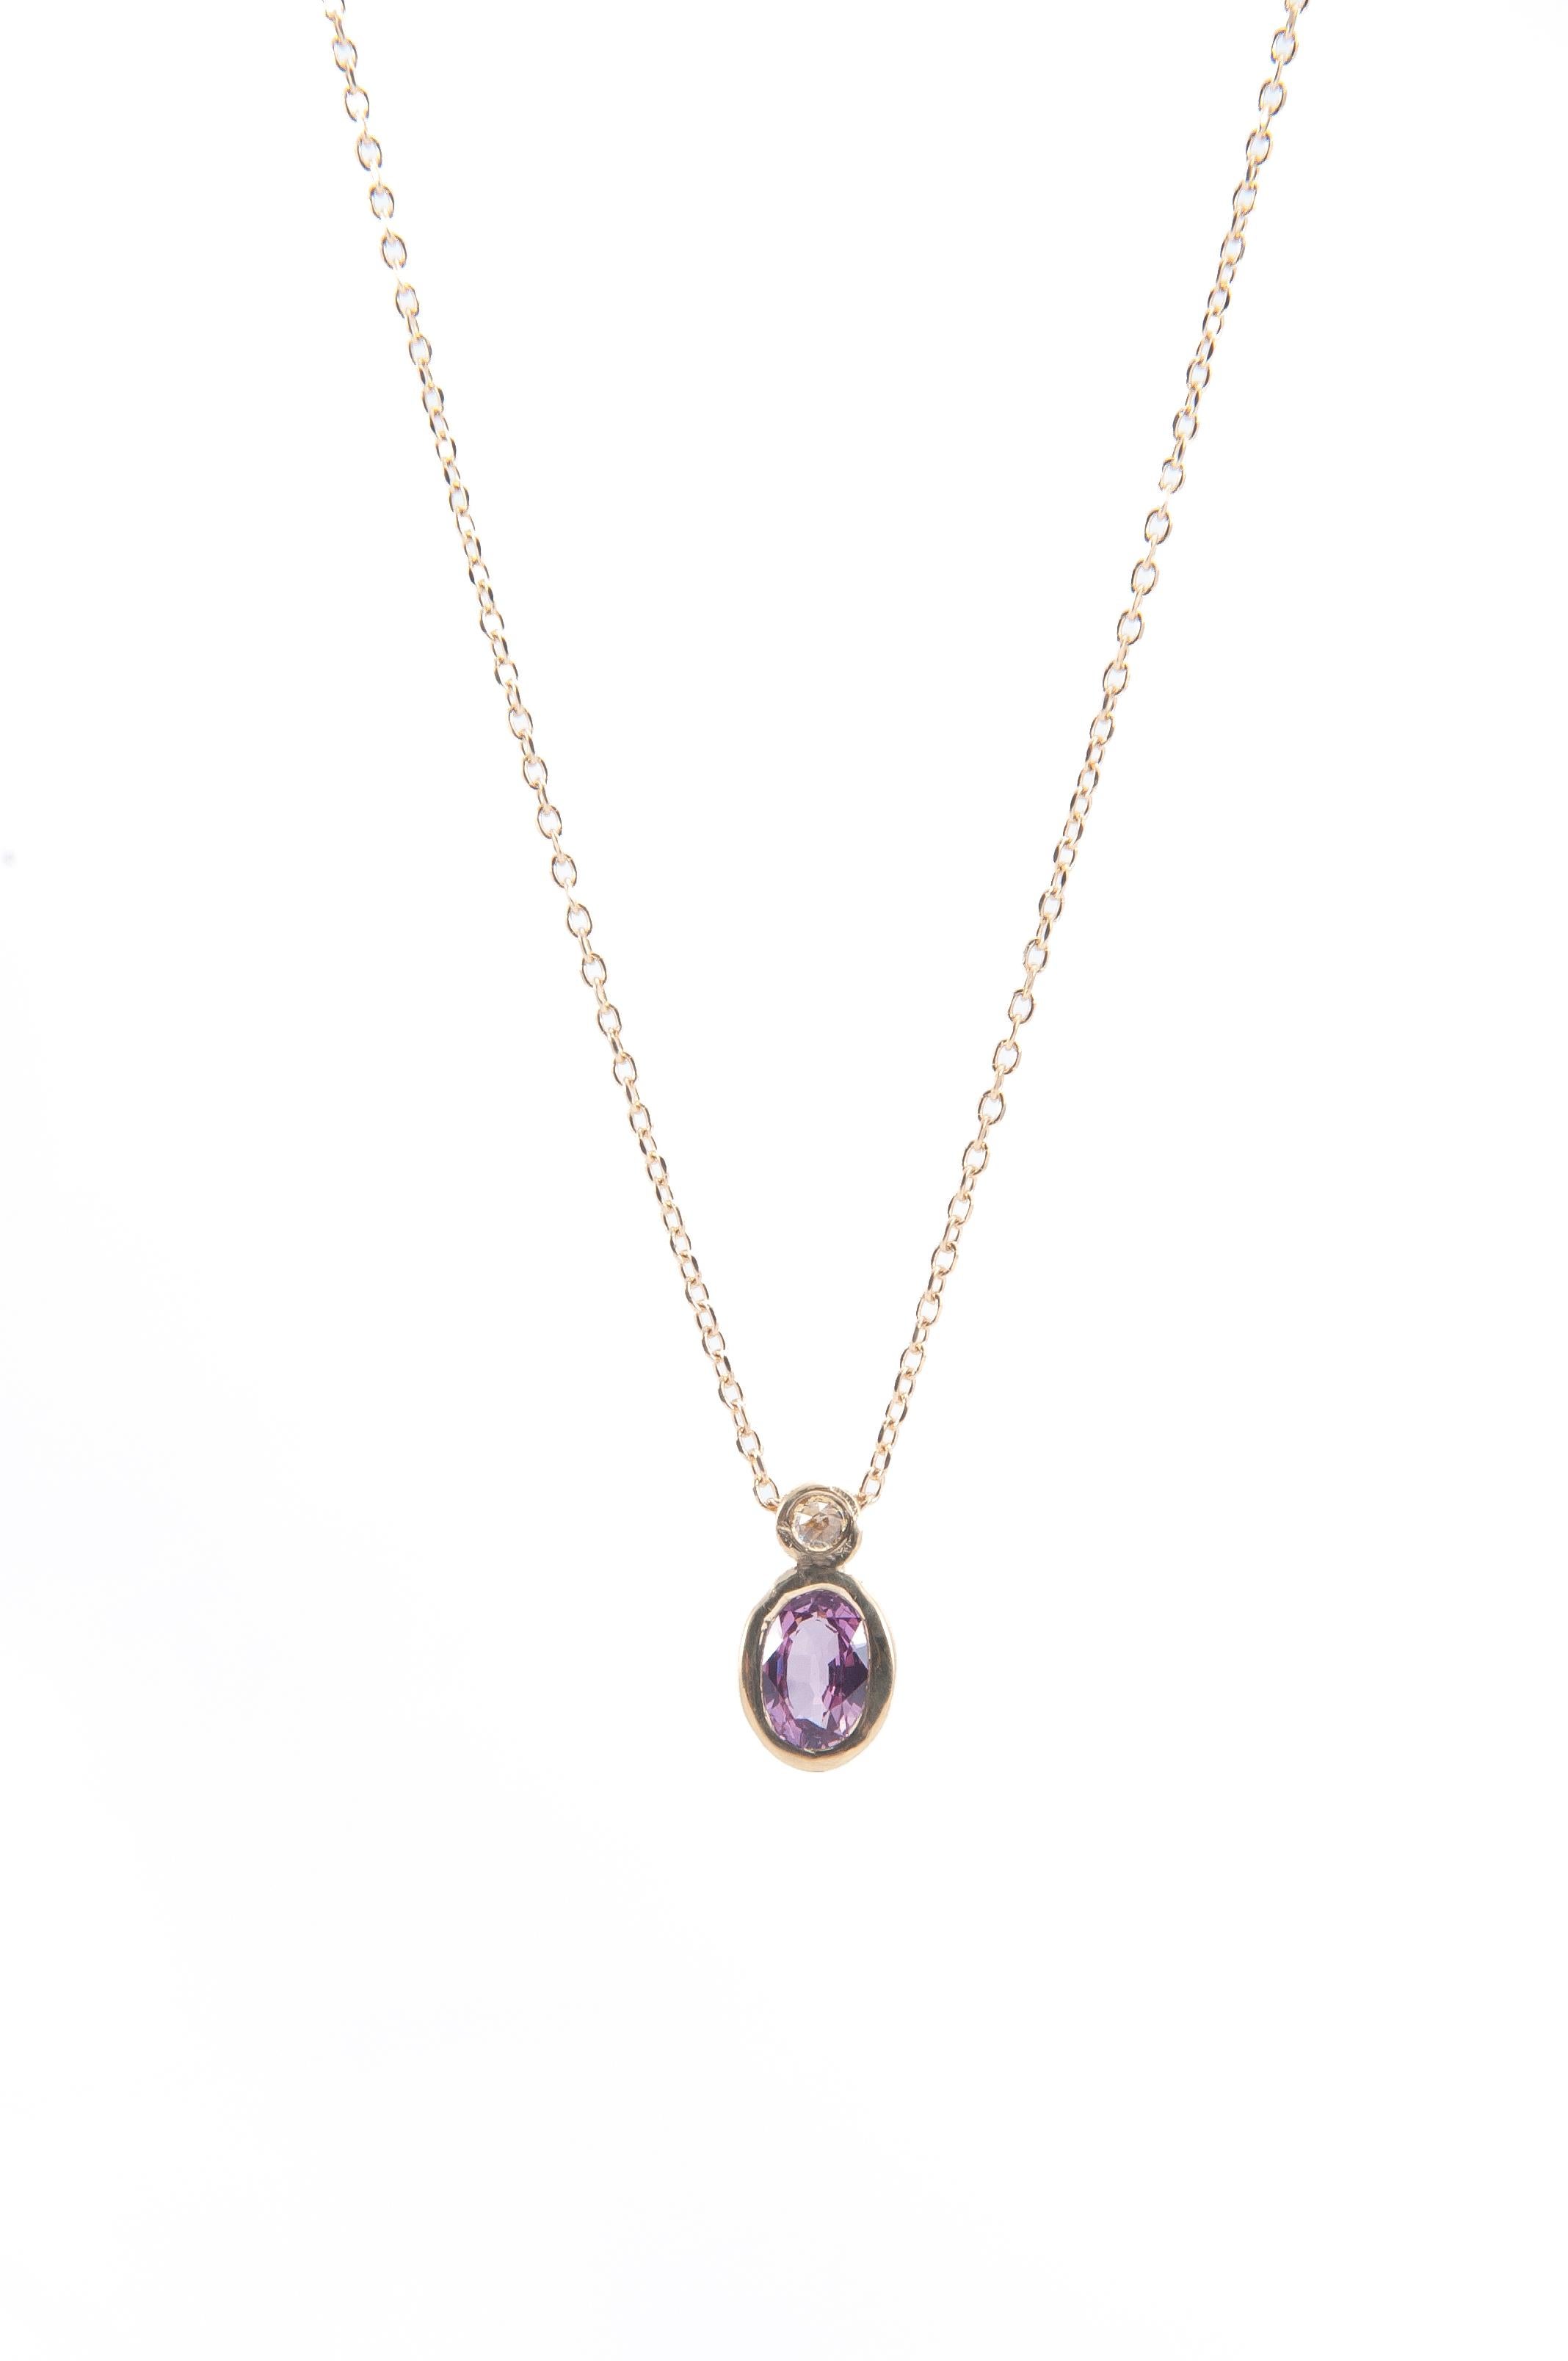 Playful colors combine to chic effect on this delicate pendant and chain.

18K yellow gold chain
bezel set 0.50ct rose cut pink sapphire
0.05ct rose cut cognac diamond drop pendant
18” chain